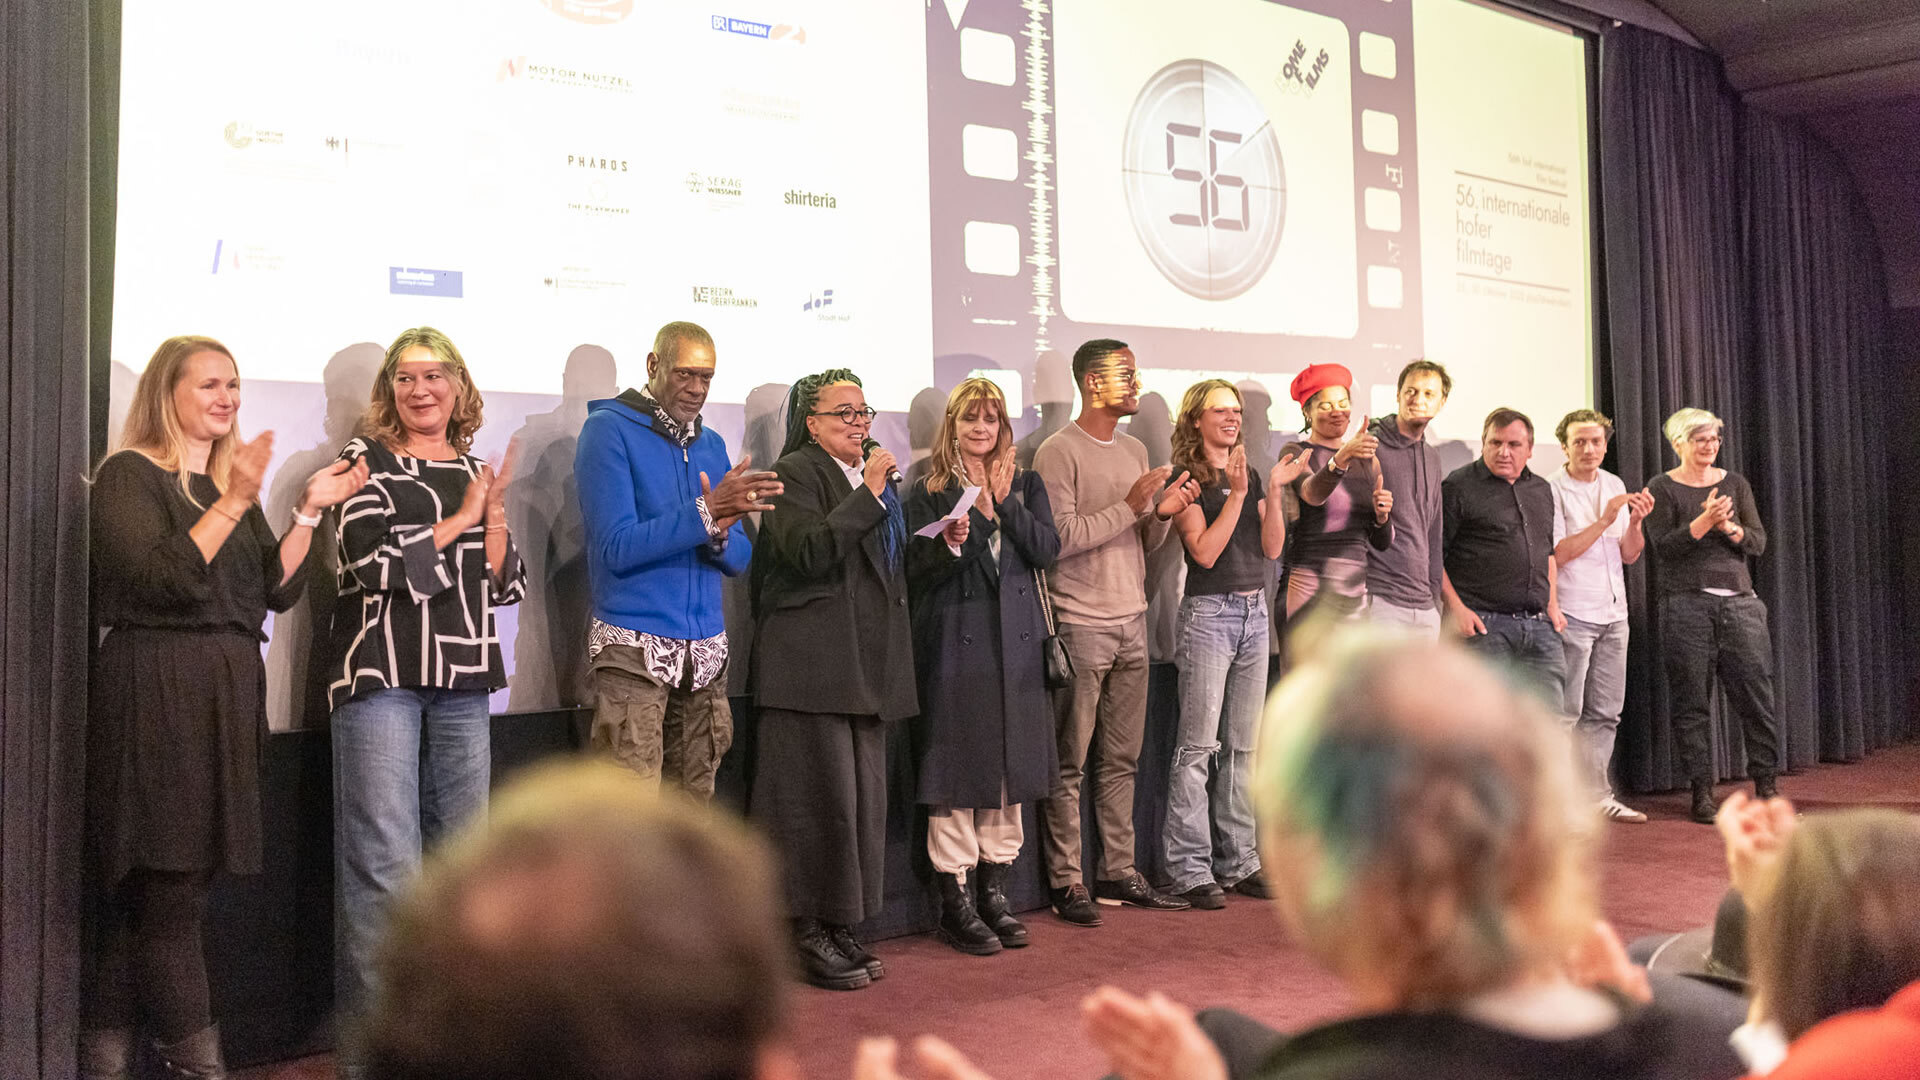 The team of HOMESHOPPERS' PARADISE at the 56th Hof International Film Festival 2022